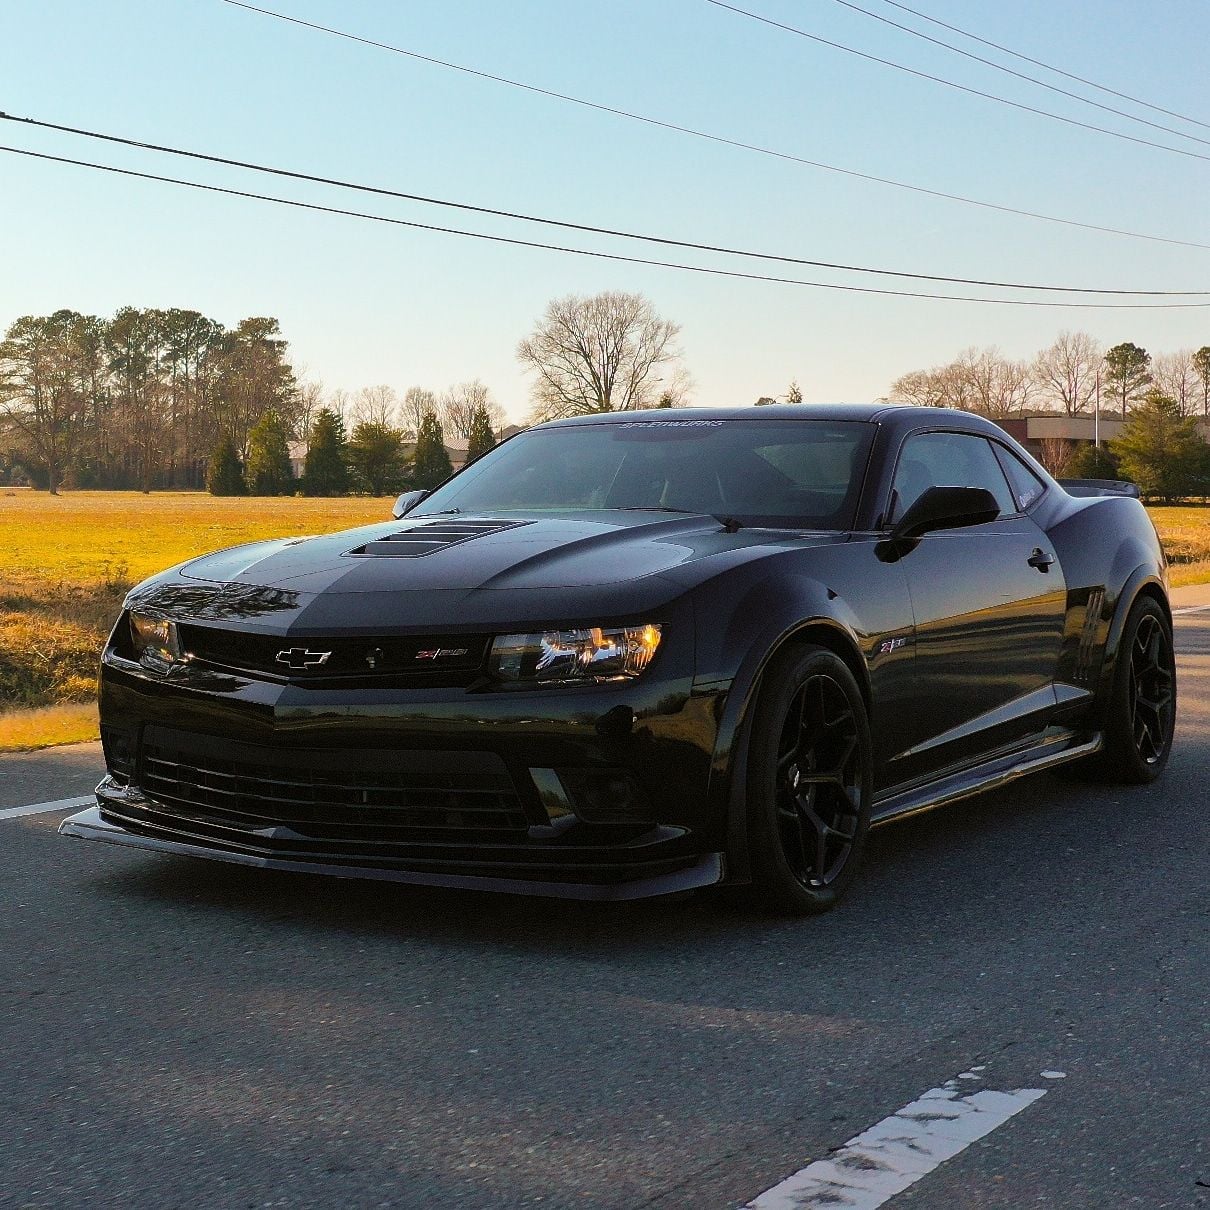 2015 Chevrolet Camaro - 2015 Z28 Camaro (cam, bolton's, 576whp) - Used - VIN 2G1FZ1EE0F9700814 - 18,670 Miles - 8 cyl - 2WD - Manual - Coupe - Black - Goldsboro, NC 27534, United States